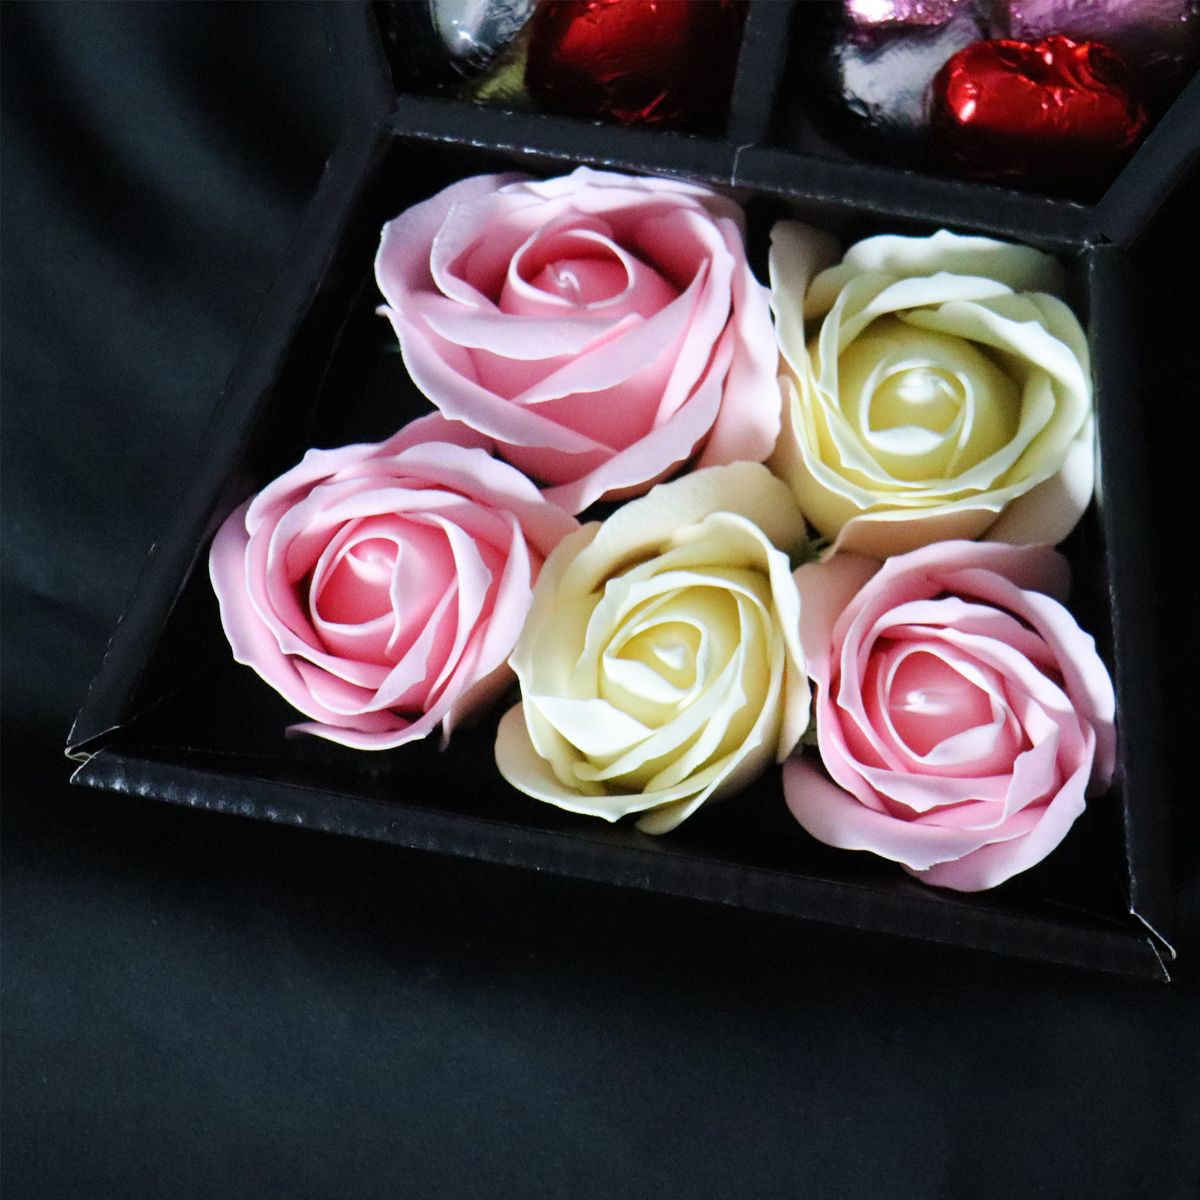 Assorted Lindt Lindor Signature Chocolate Bouquet With Pink & Ivory Roses